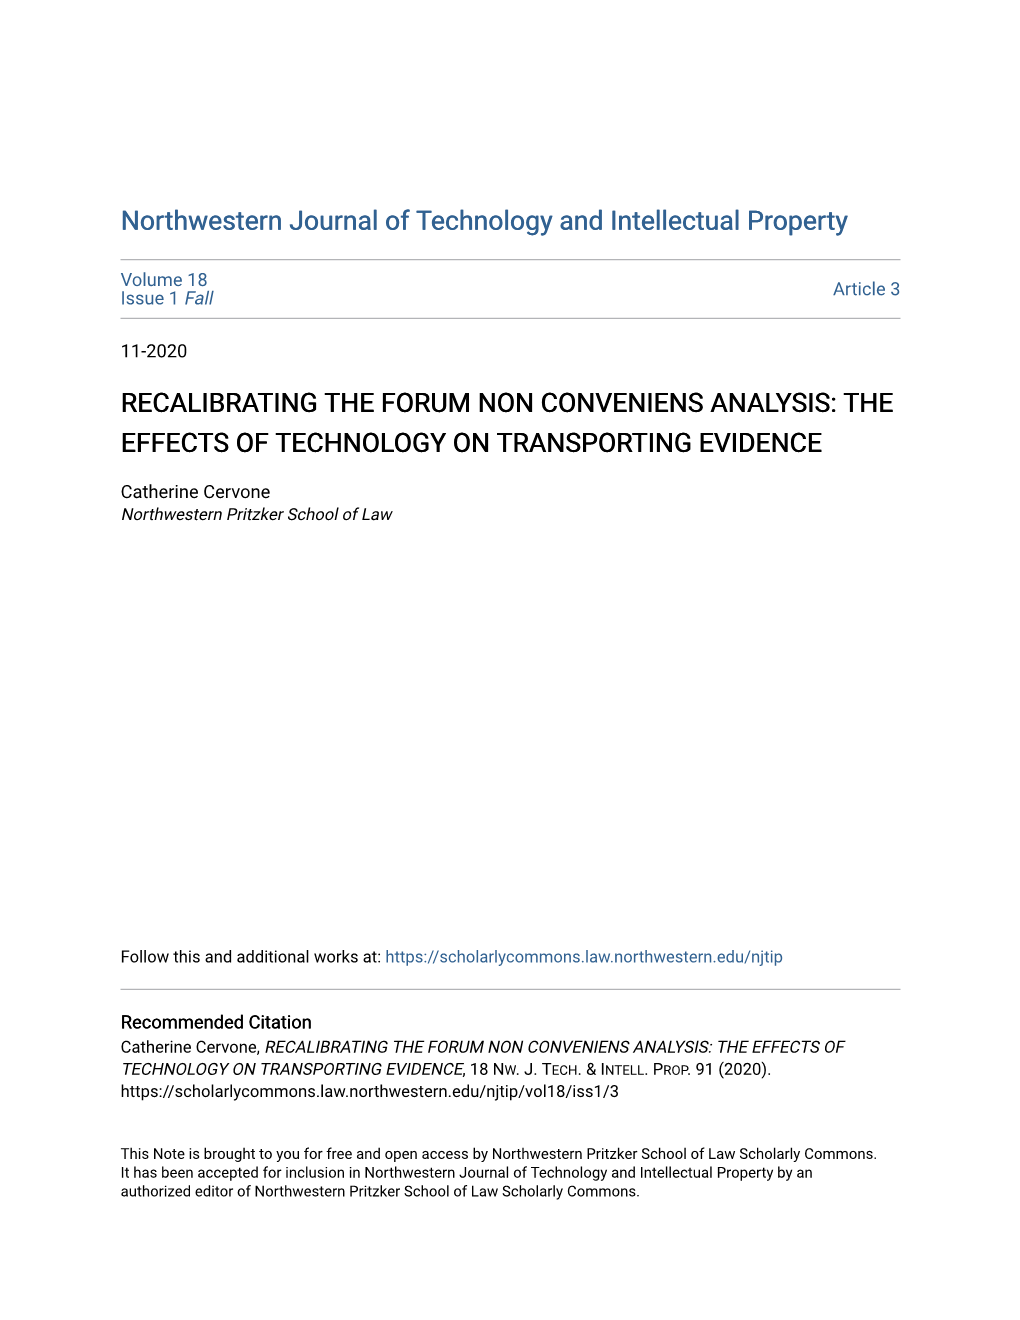 Recalibrating the Forum Non Conveniens Analysis: the Effects of Technology on Transporting Evidence